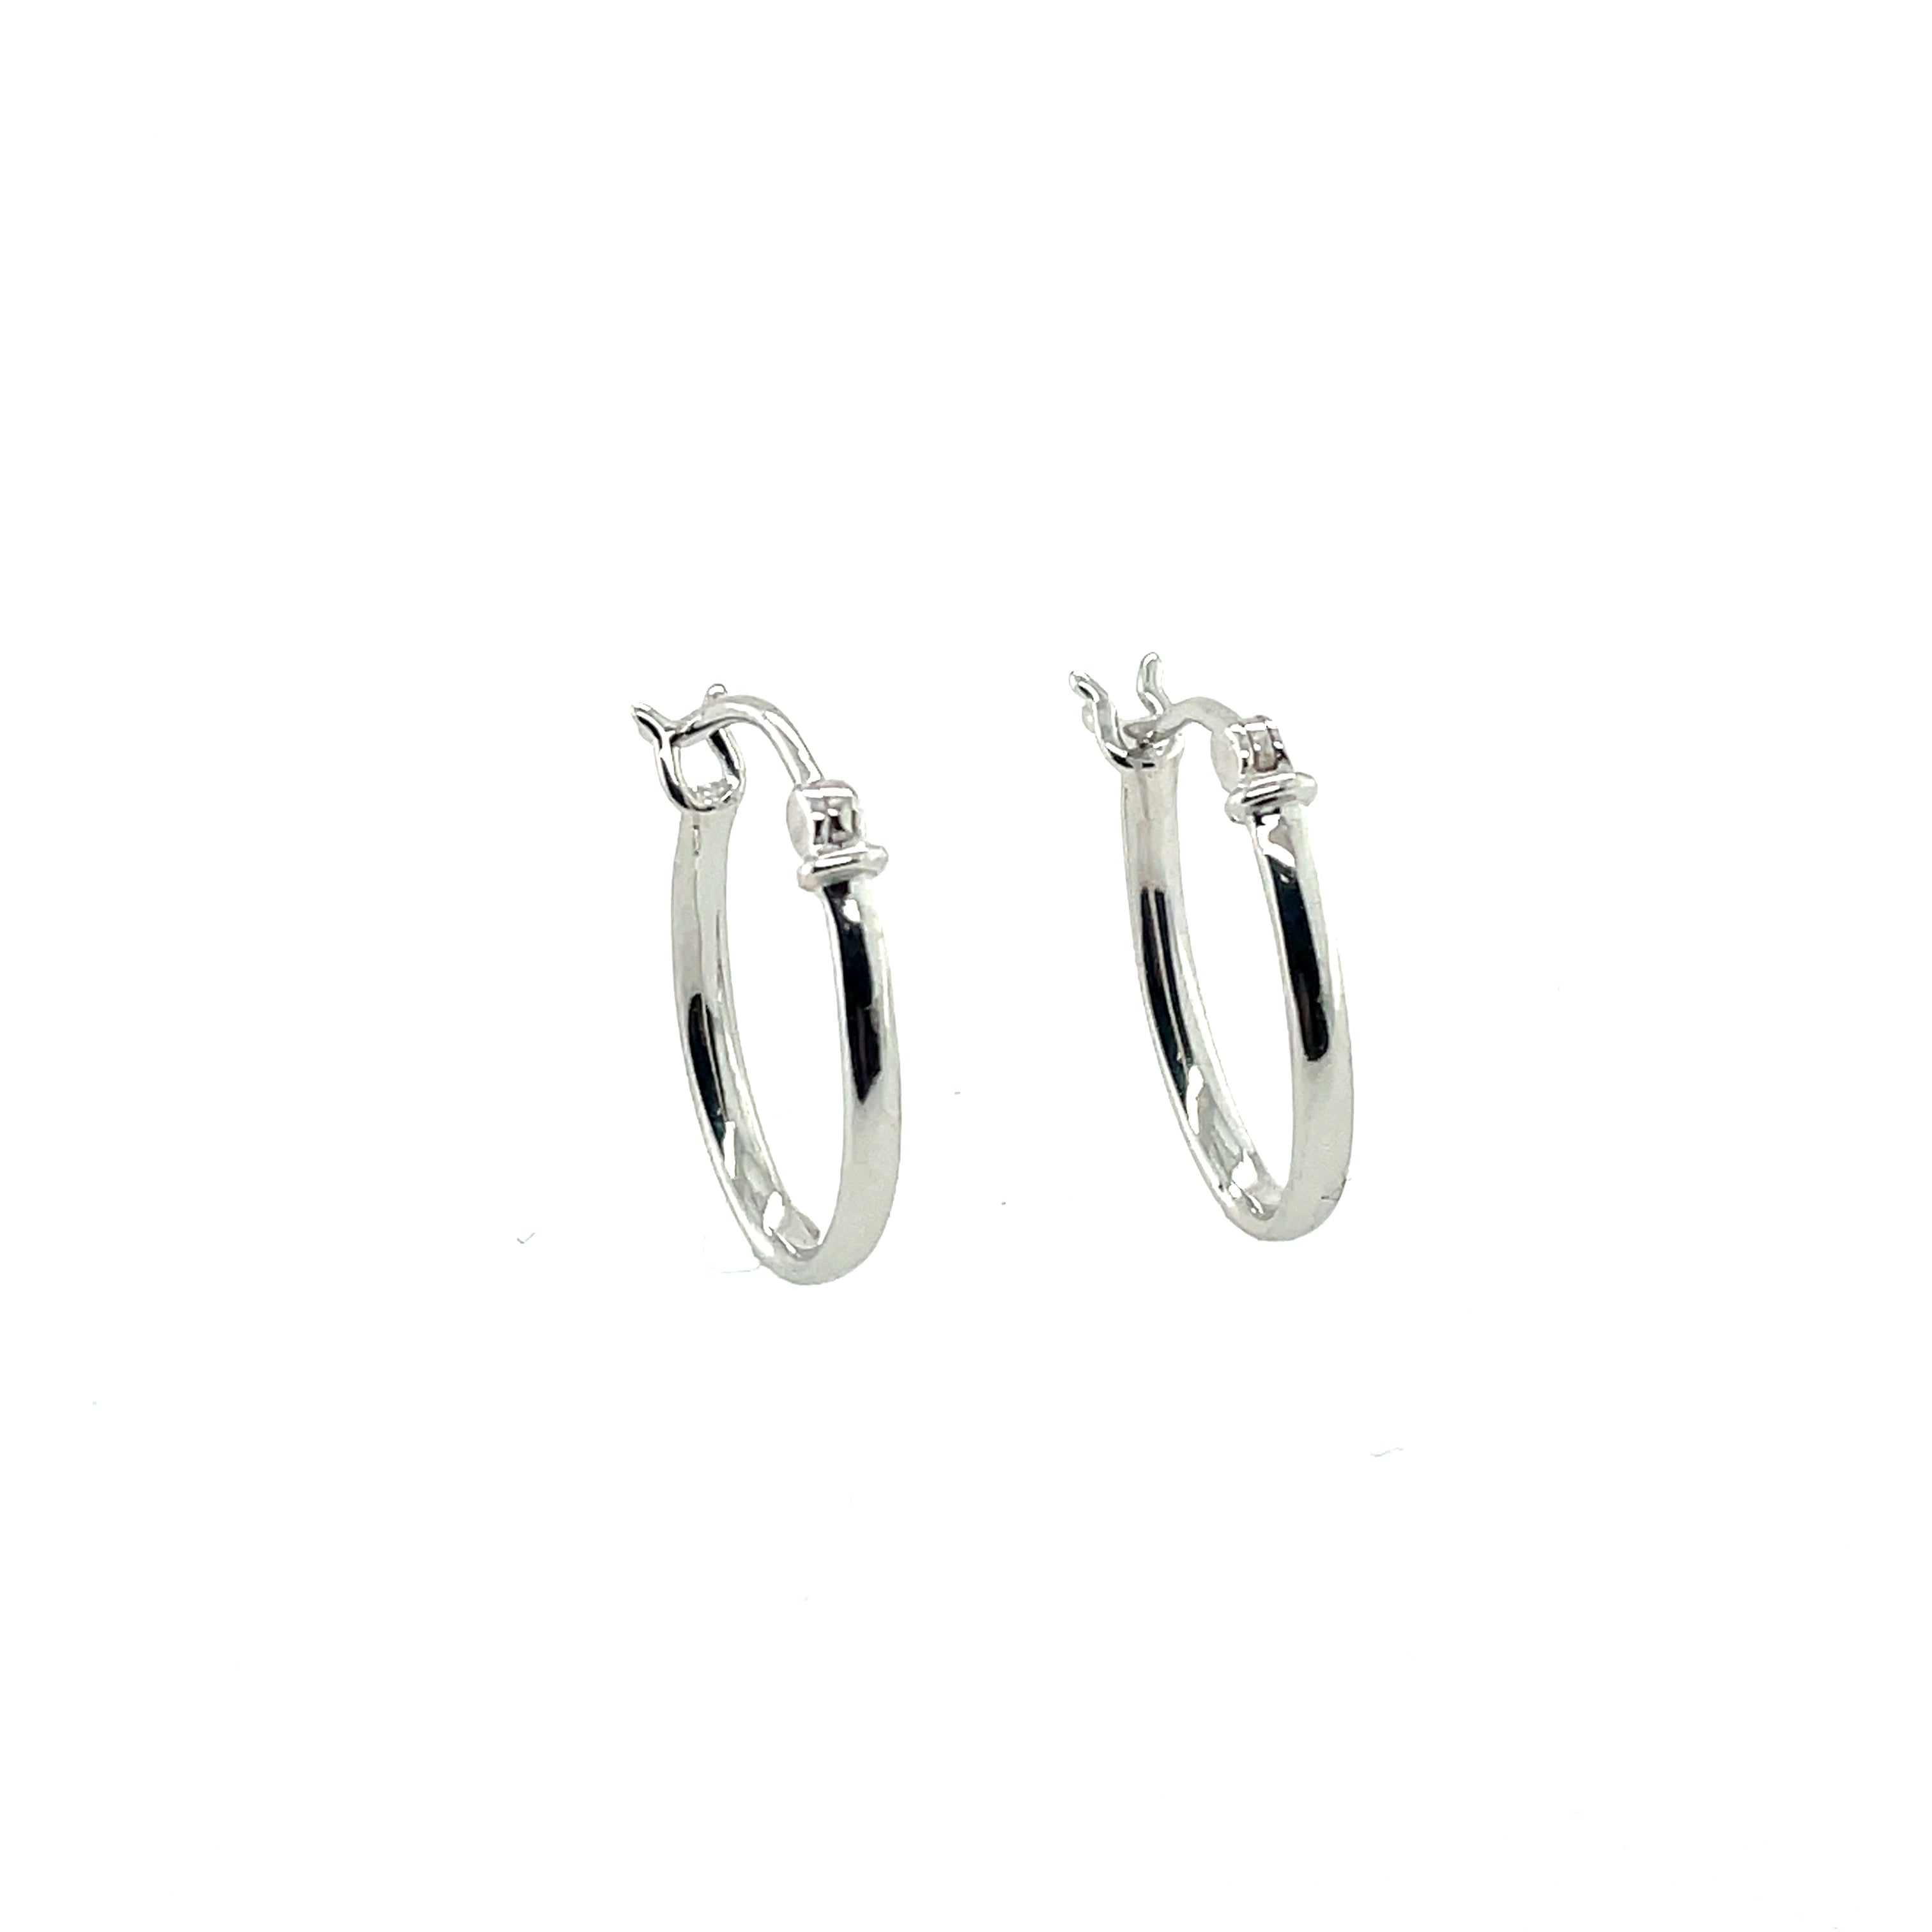 Silver Hoop Earrings - MJ022 - Hallmark Jewellers Formby & The Jewellers Bench Widnes